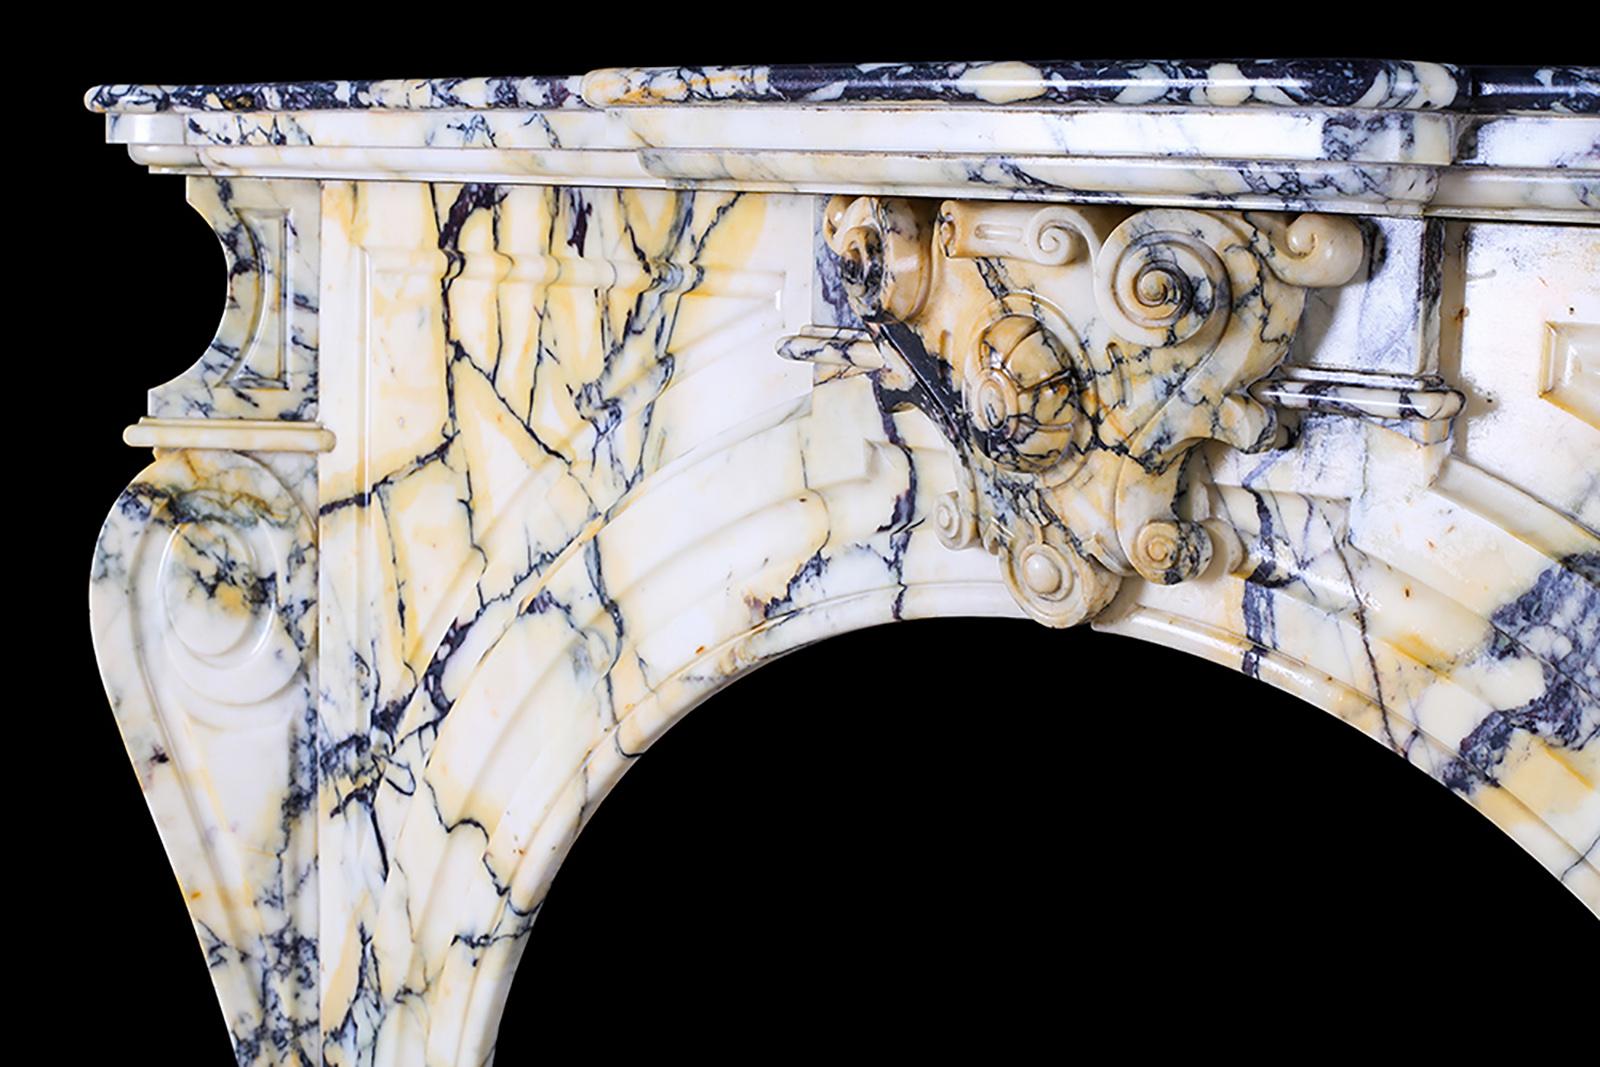 Grand arched pavonazza marble antique chimney piece, Belgian mid-19th century.